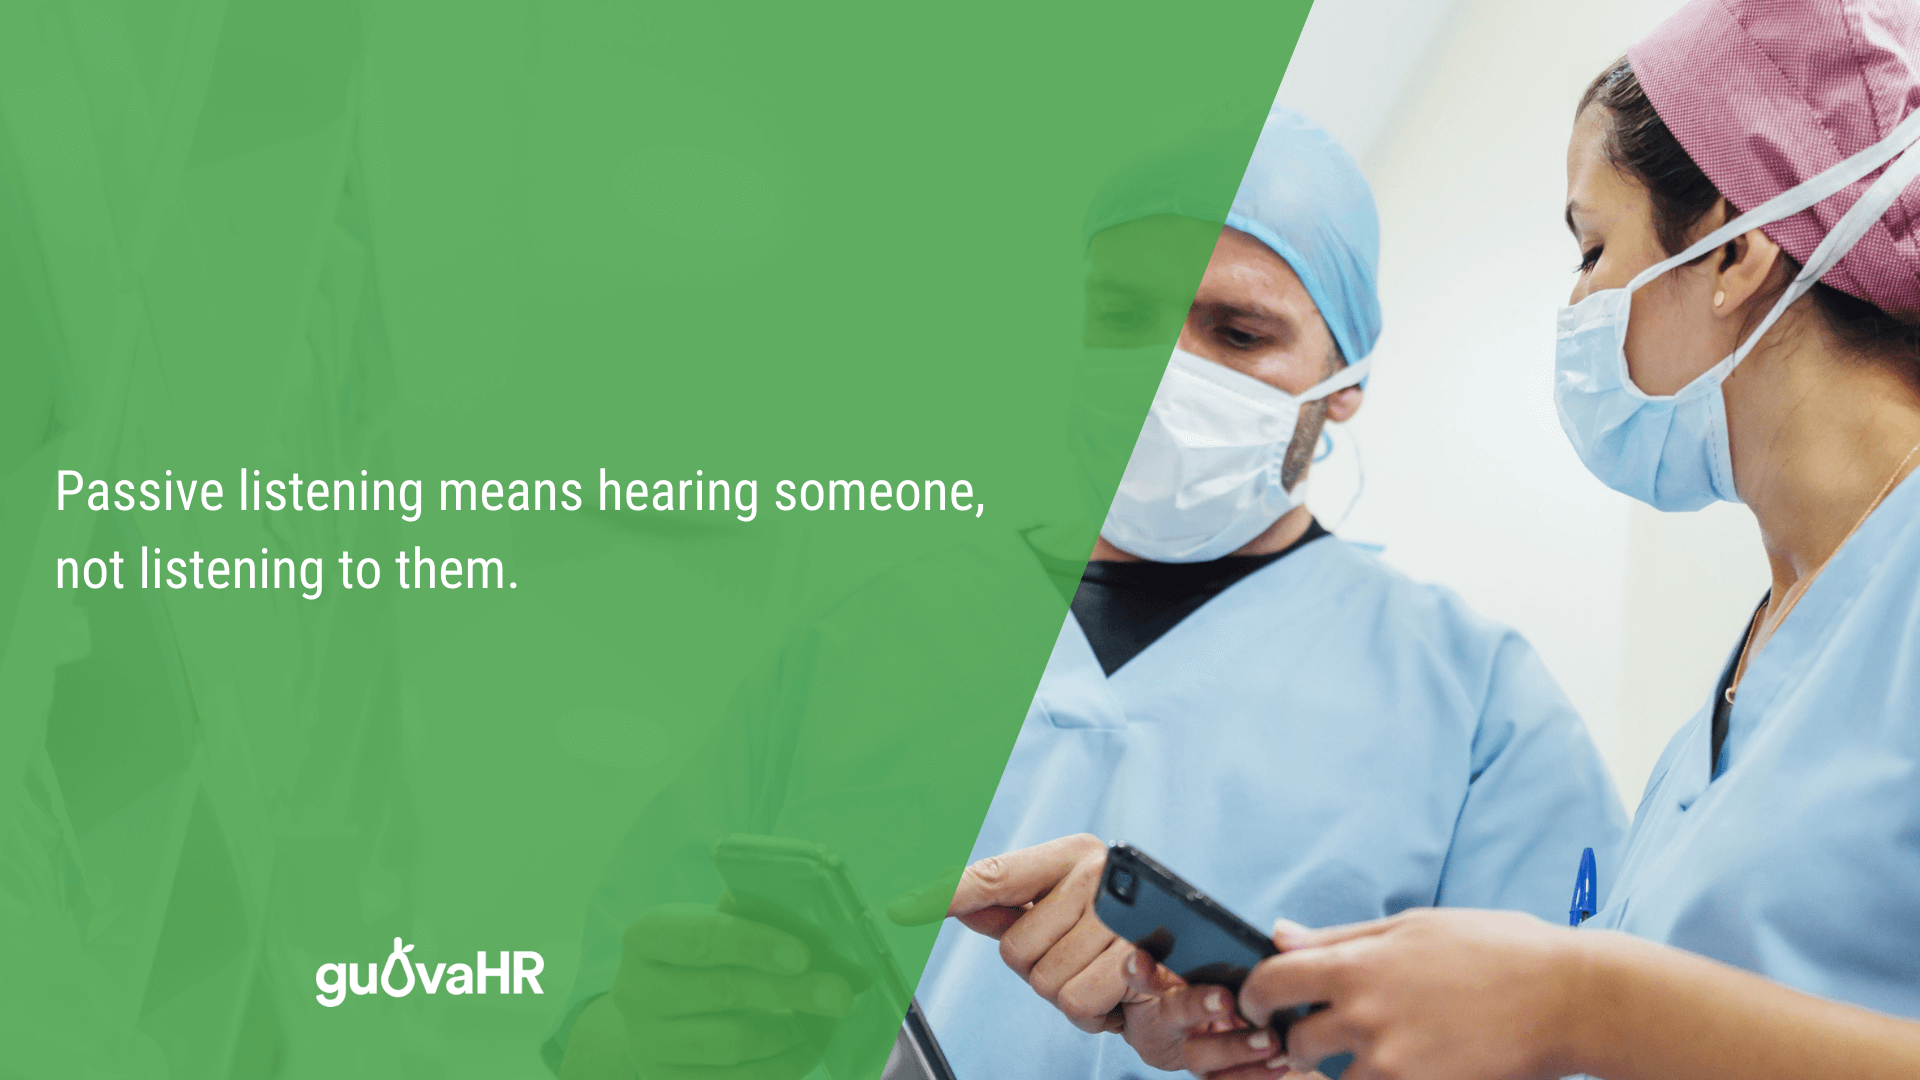 Healthcare workers using smart phones and an internal communication problem quote that says "Passive listening means hearing someone, not listening to them."